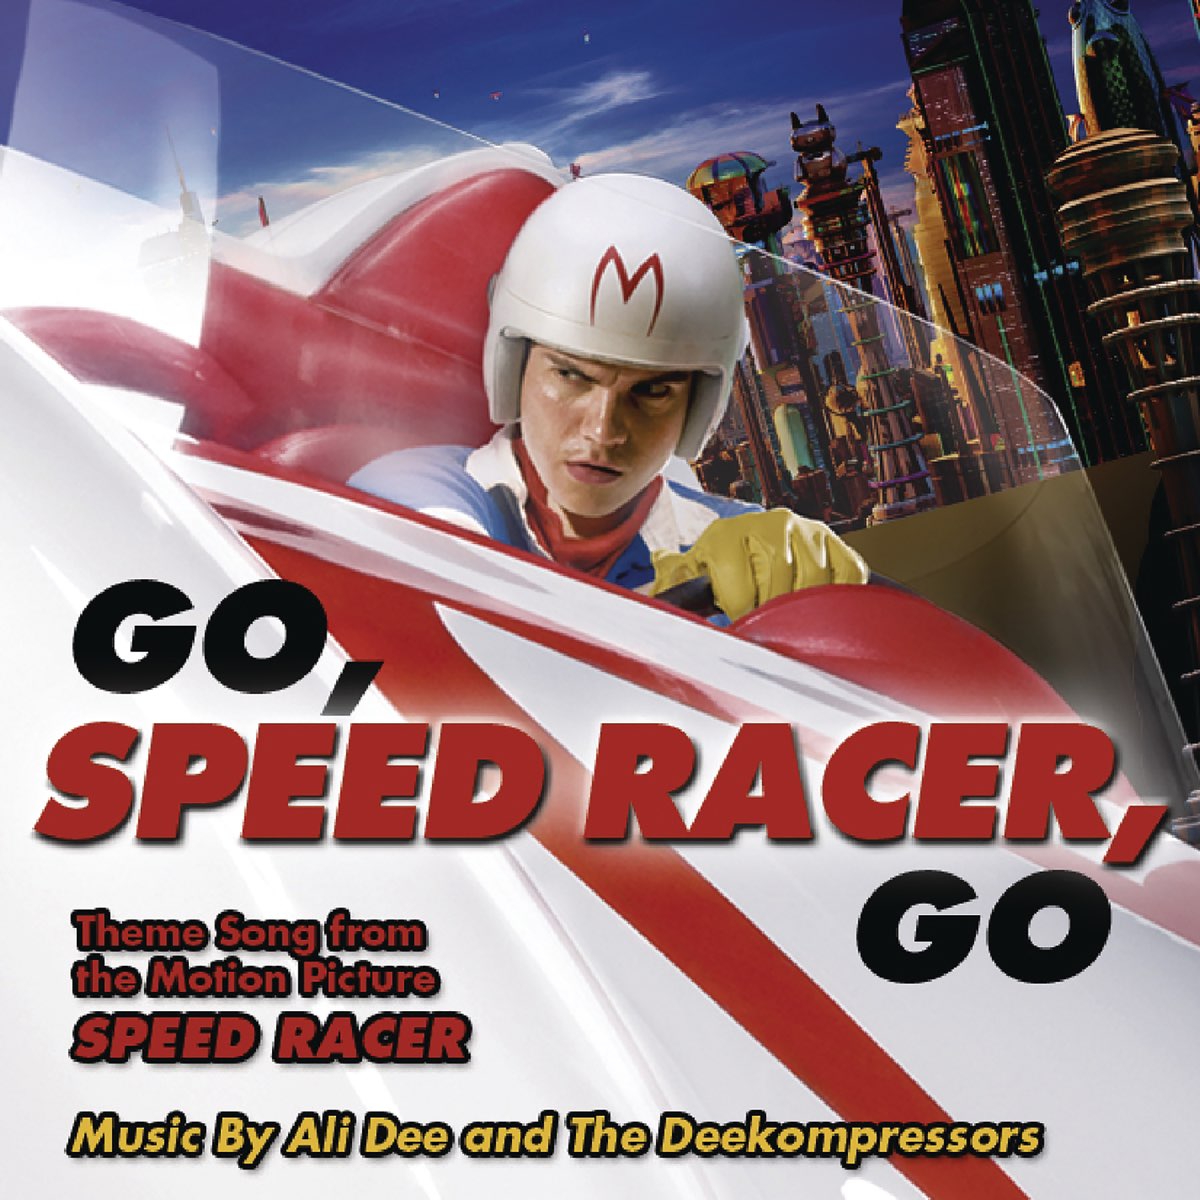 Go Speed Racer Go (Theme Song from the Motion Picture Speed Racer) - EP by  Ali Dee and The Deekompressors on Apple Music